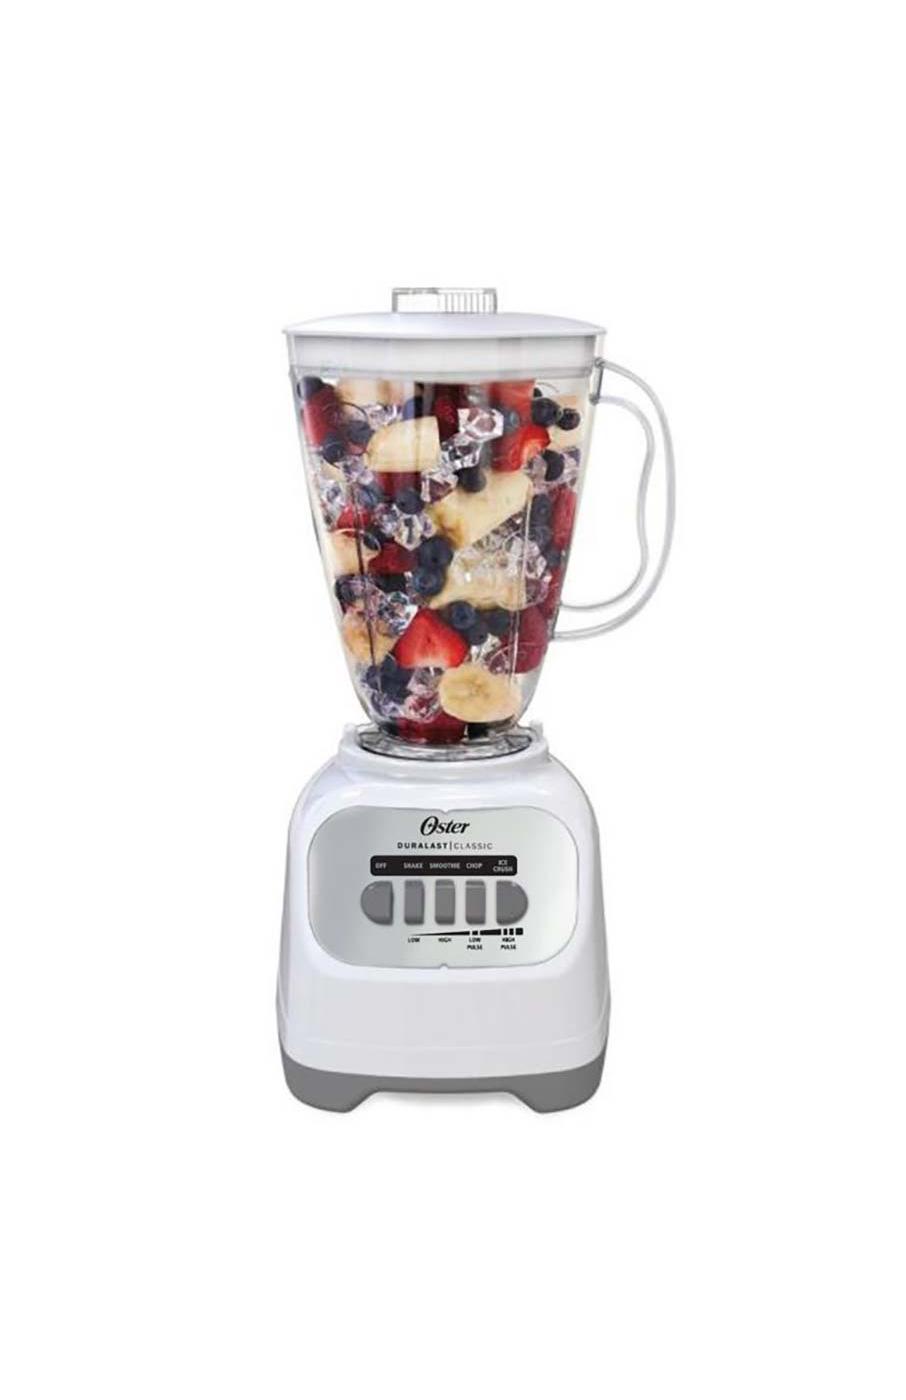 Oster Classic Series 5-Speed Blender with Plastic Jar - White; image 1 of 2